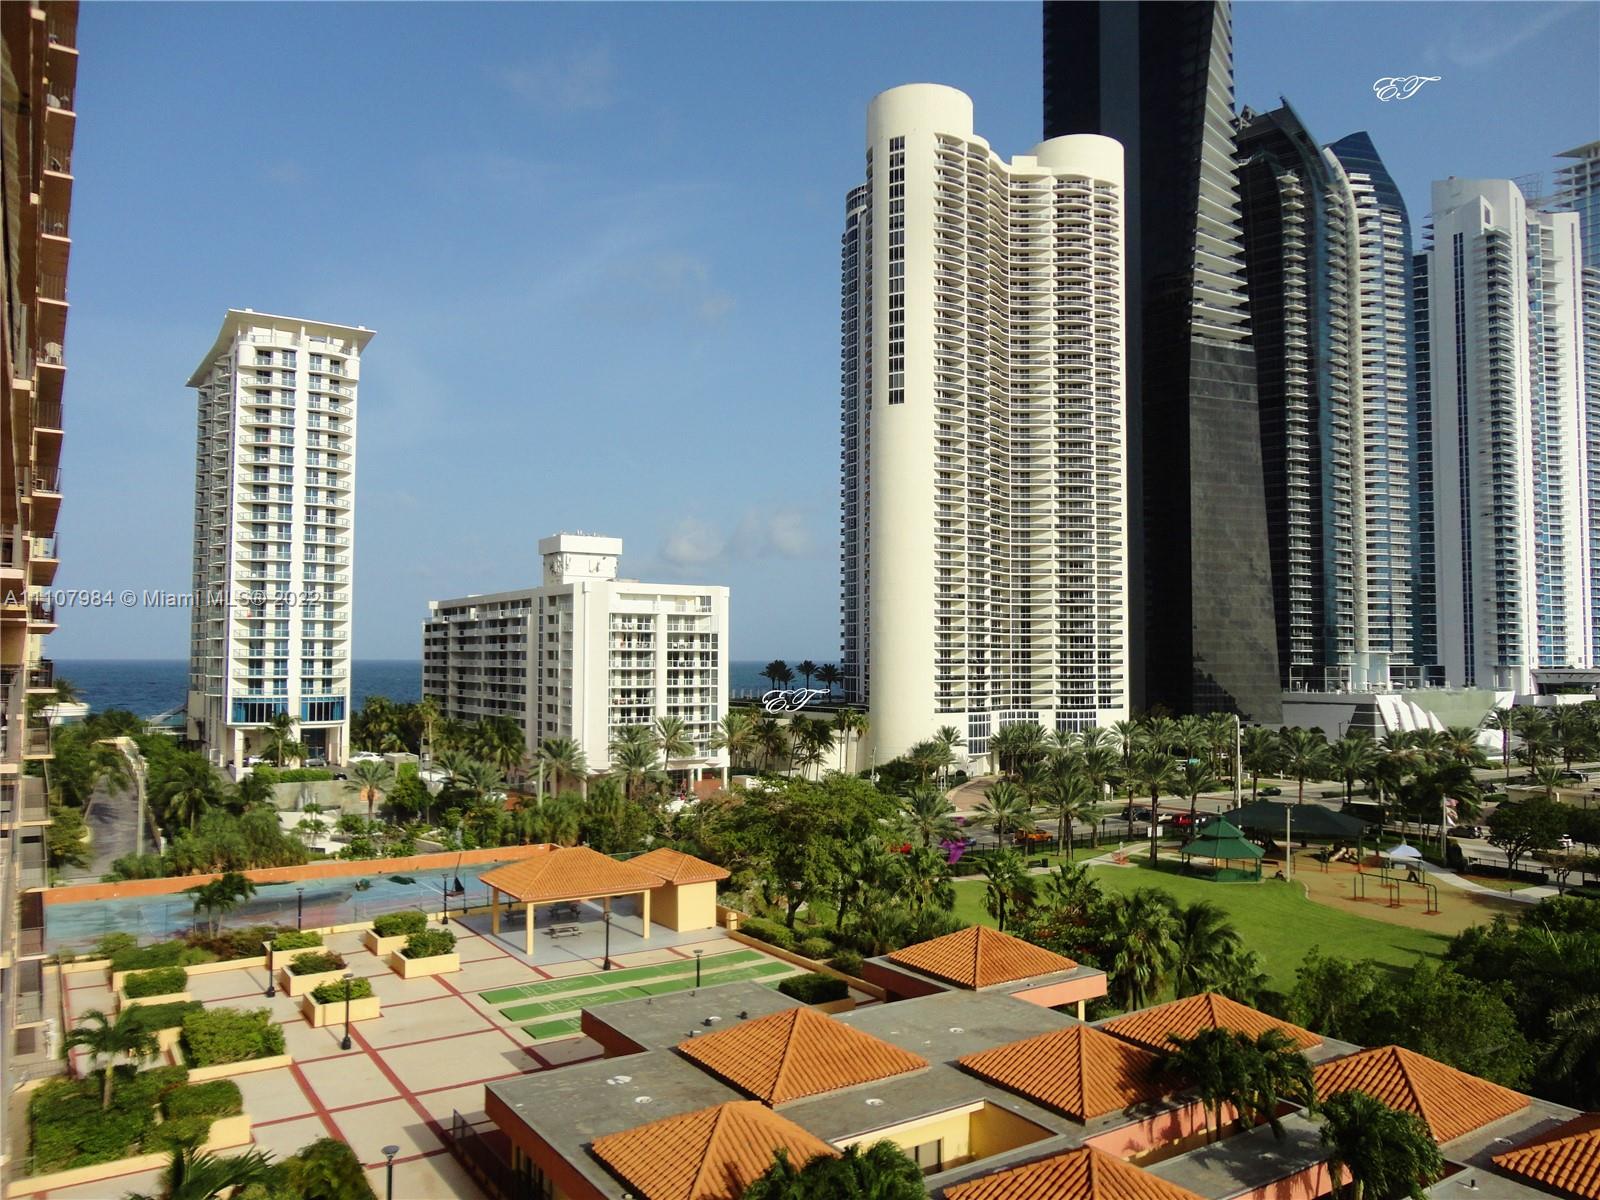 a front view of a city with tall buildings